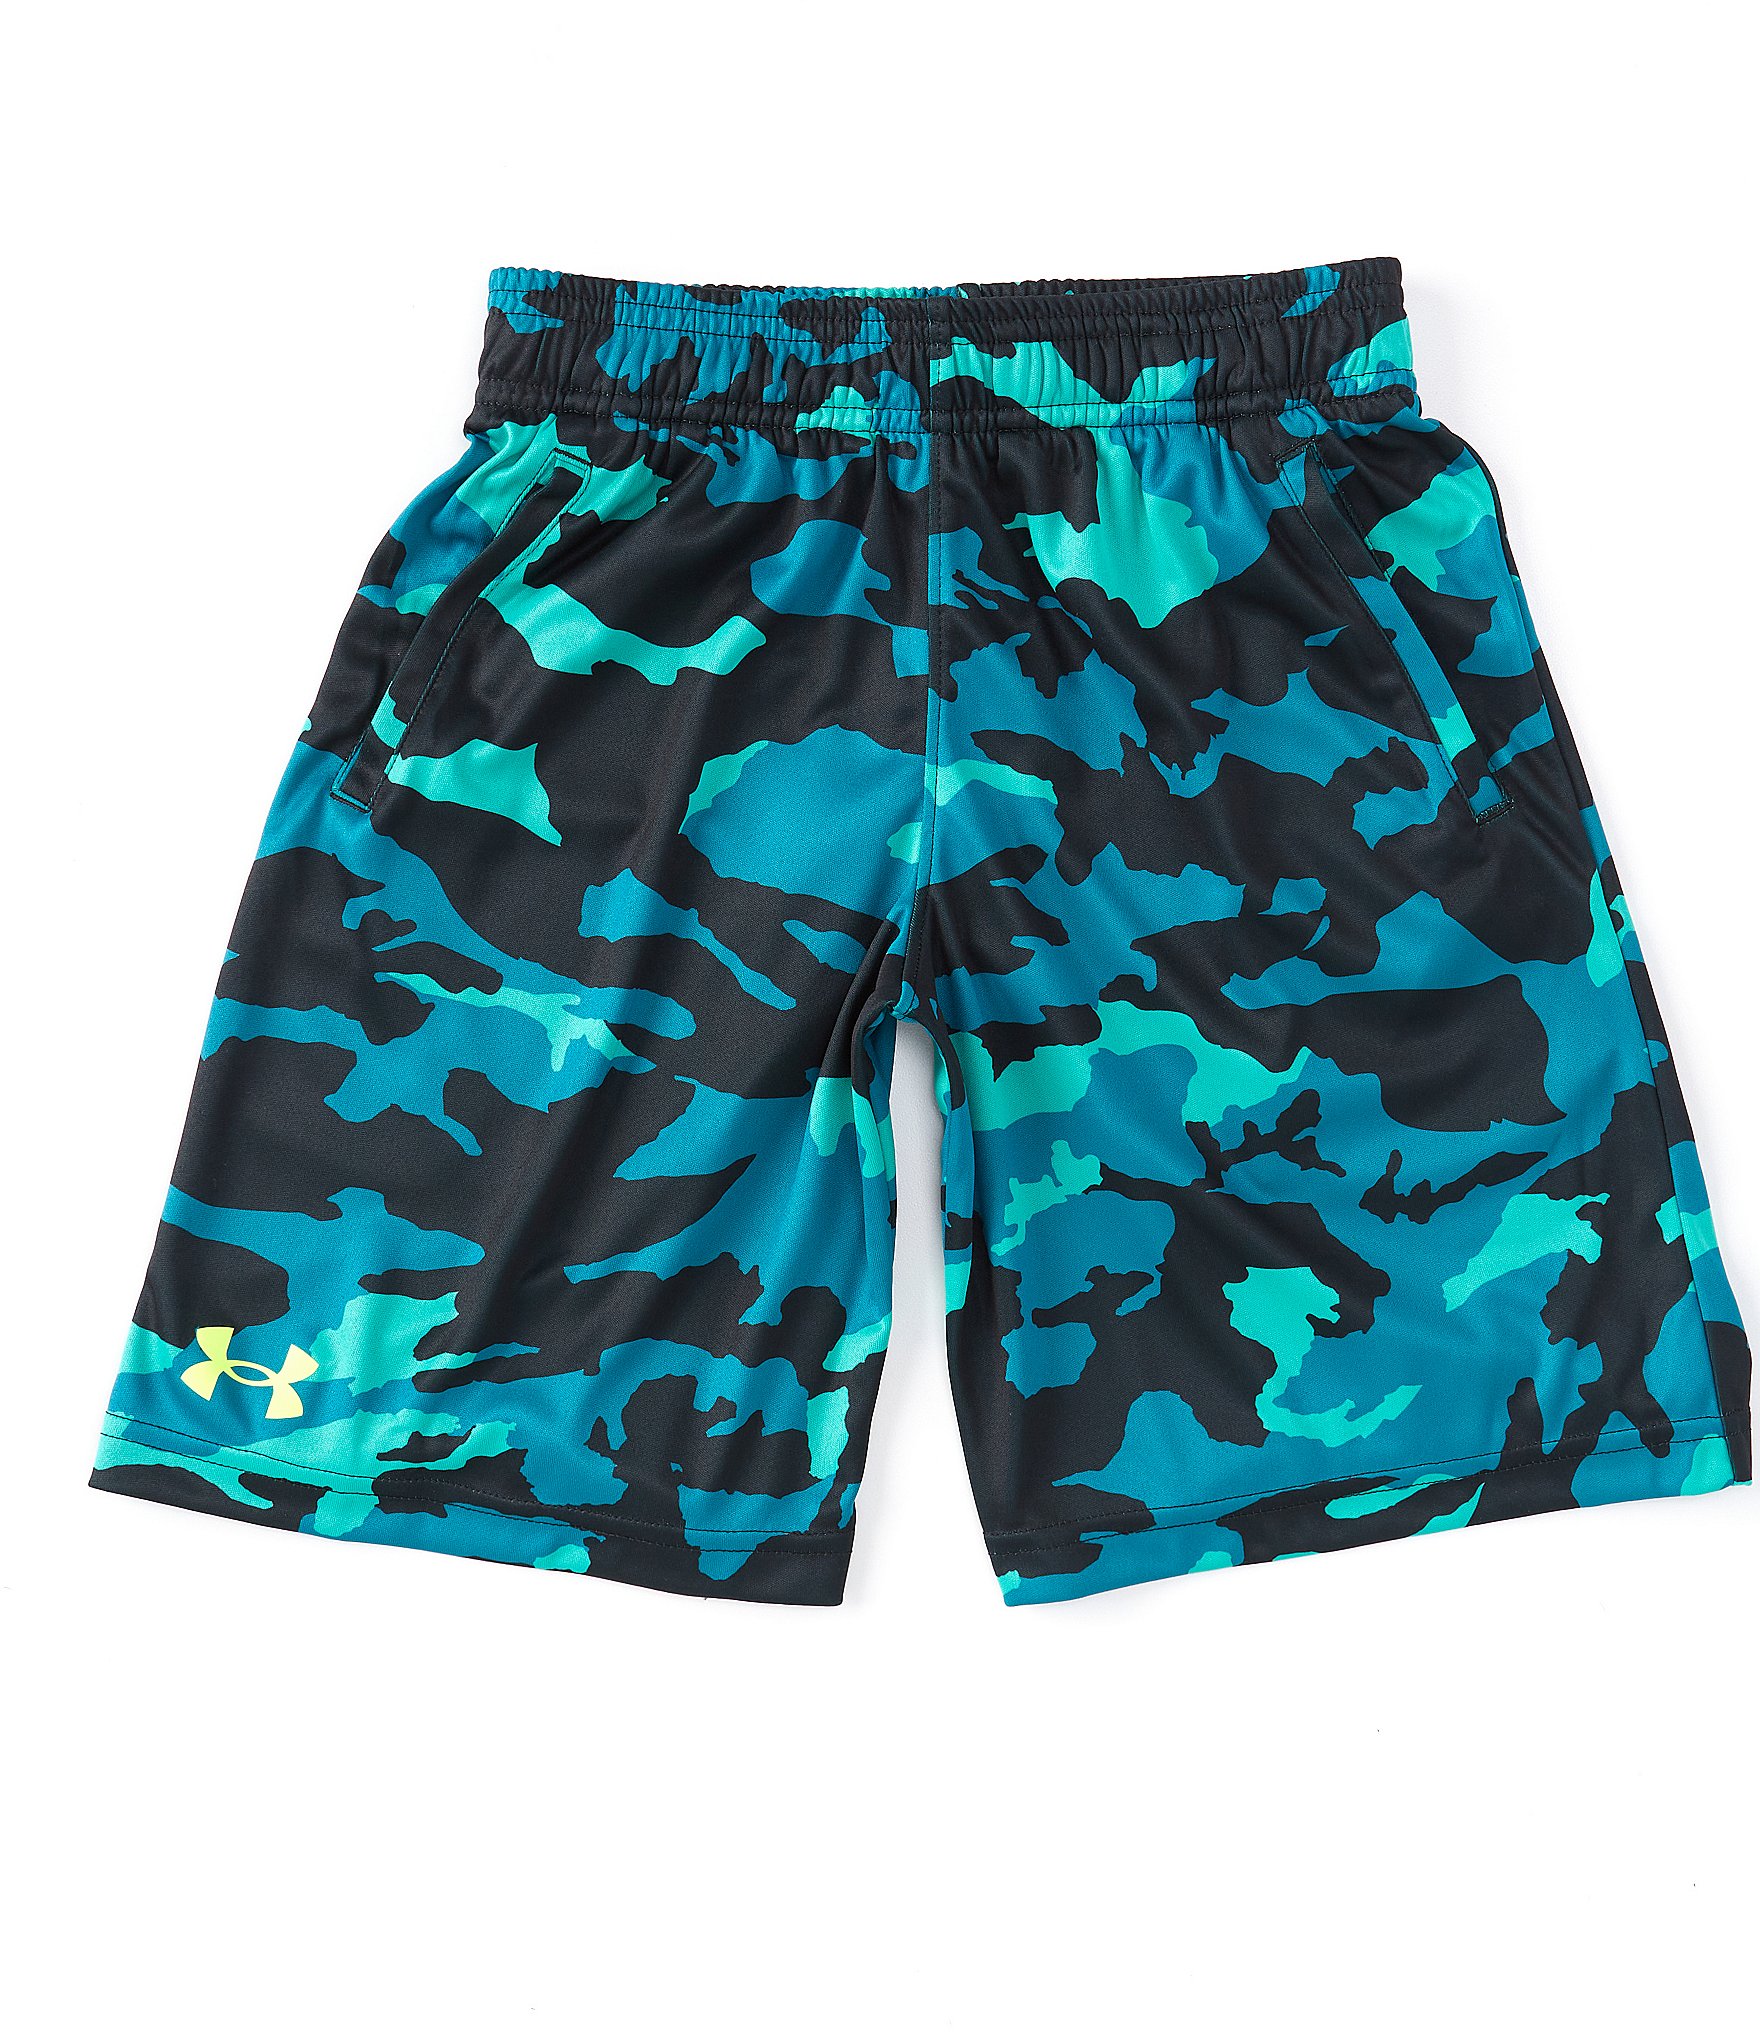 Buy Boys' Under Armour Shorts Online